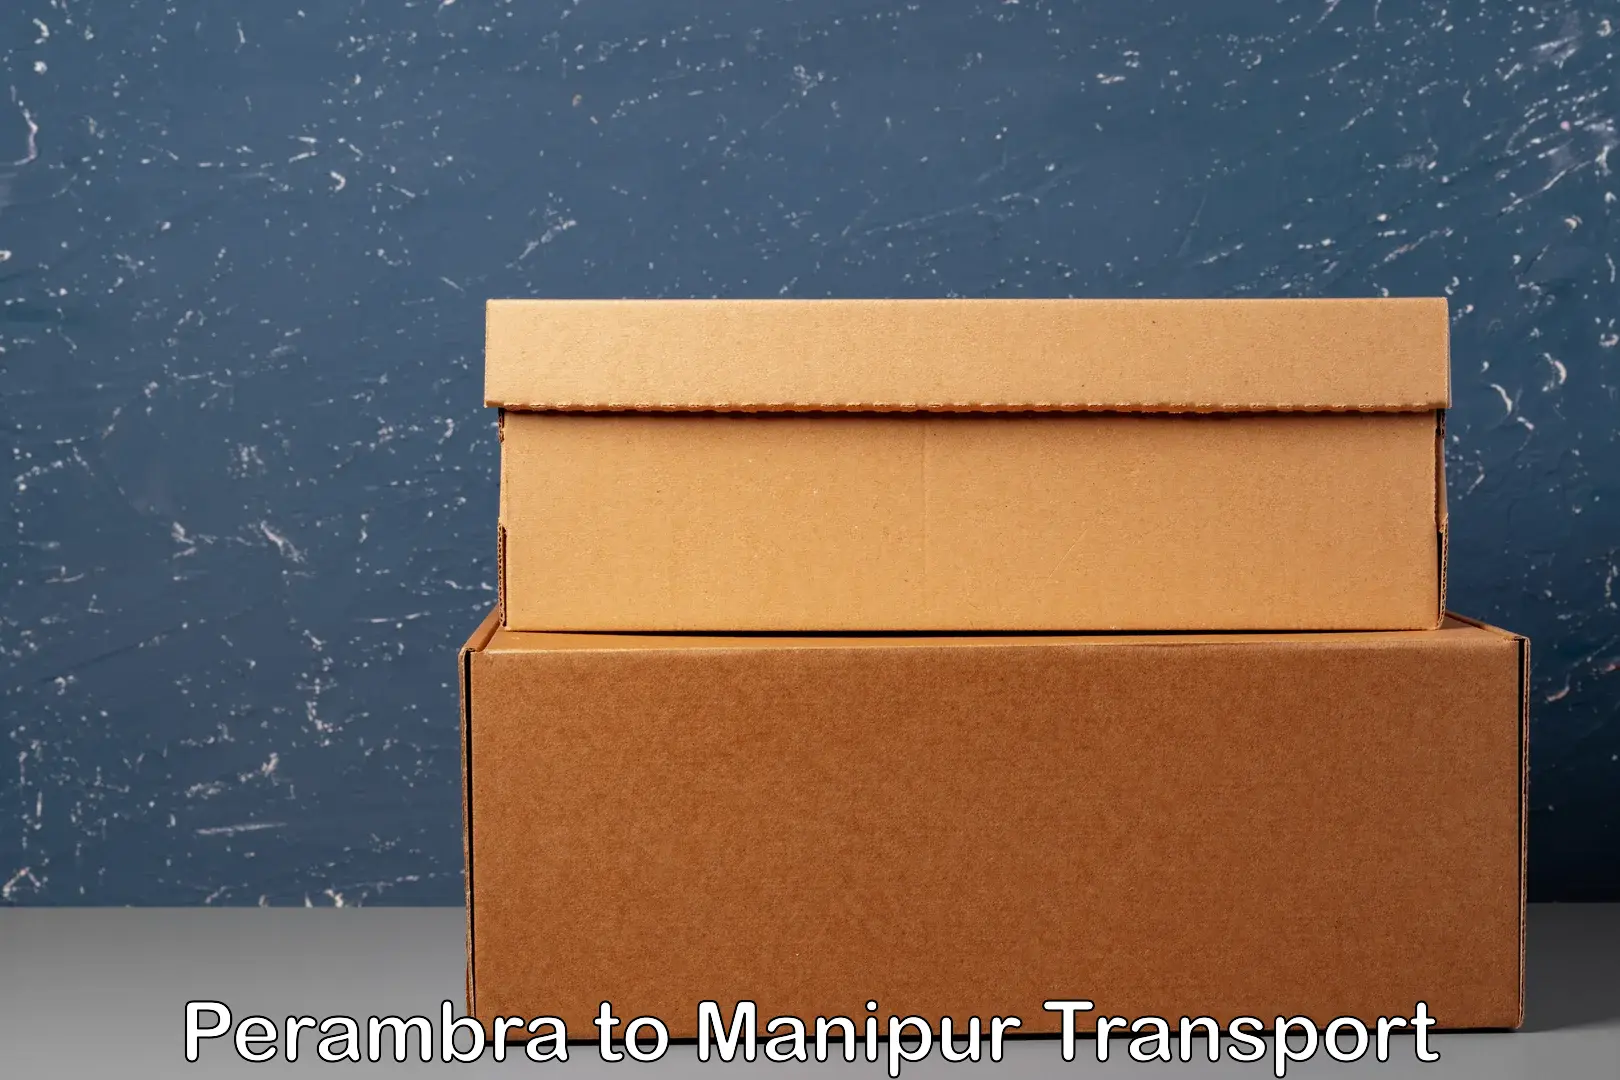 Transport shared services Perambra to Manipur